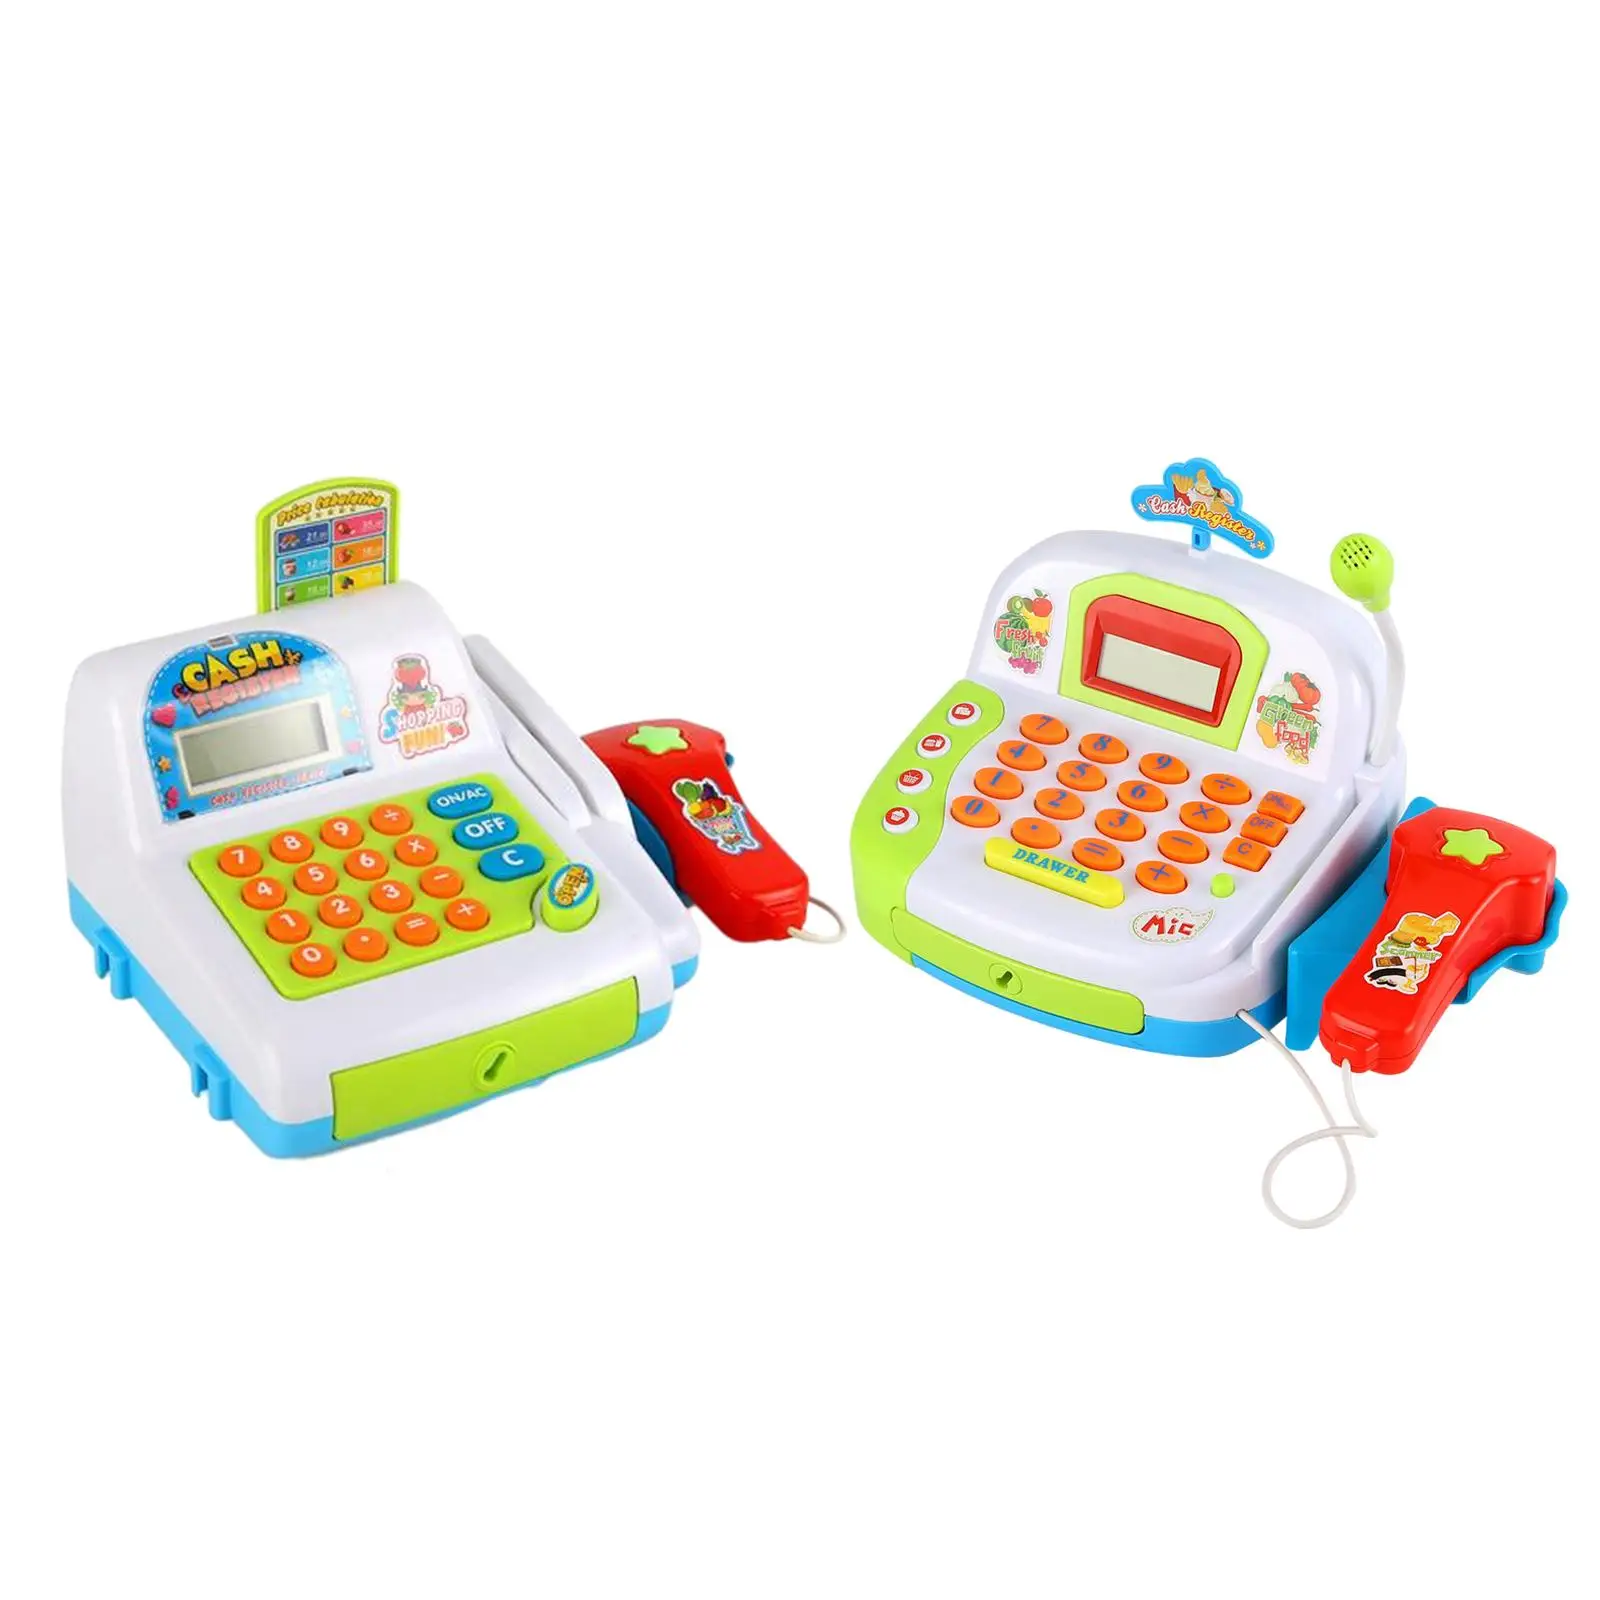 

Supermarket Store Checkout Toys Cash Register Playset with Sound Lights Development for Children Toddlers Kids Baby Gifts